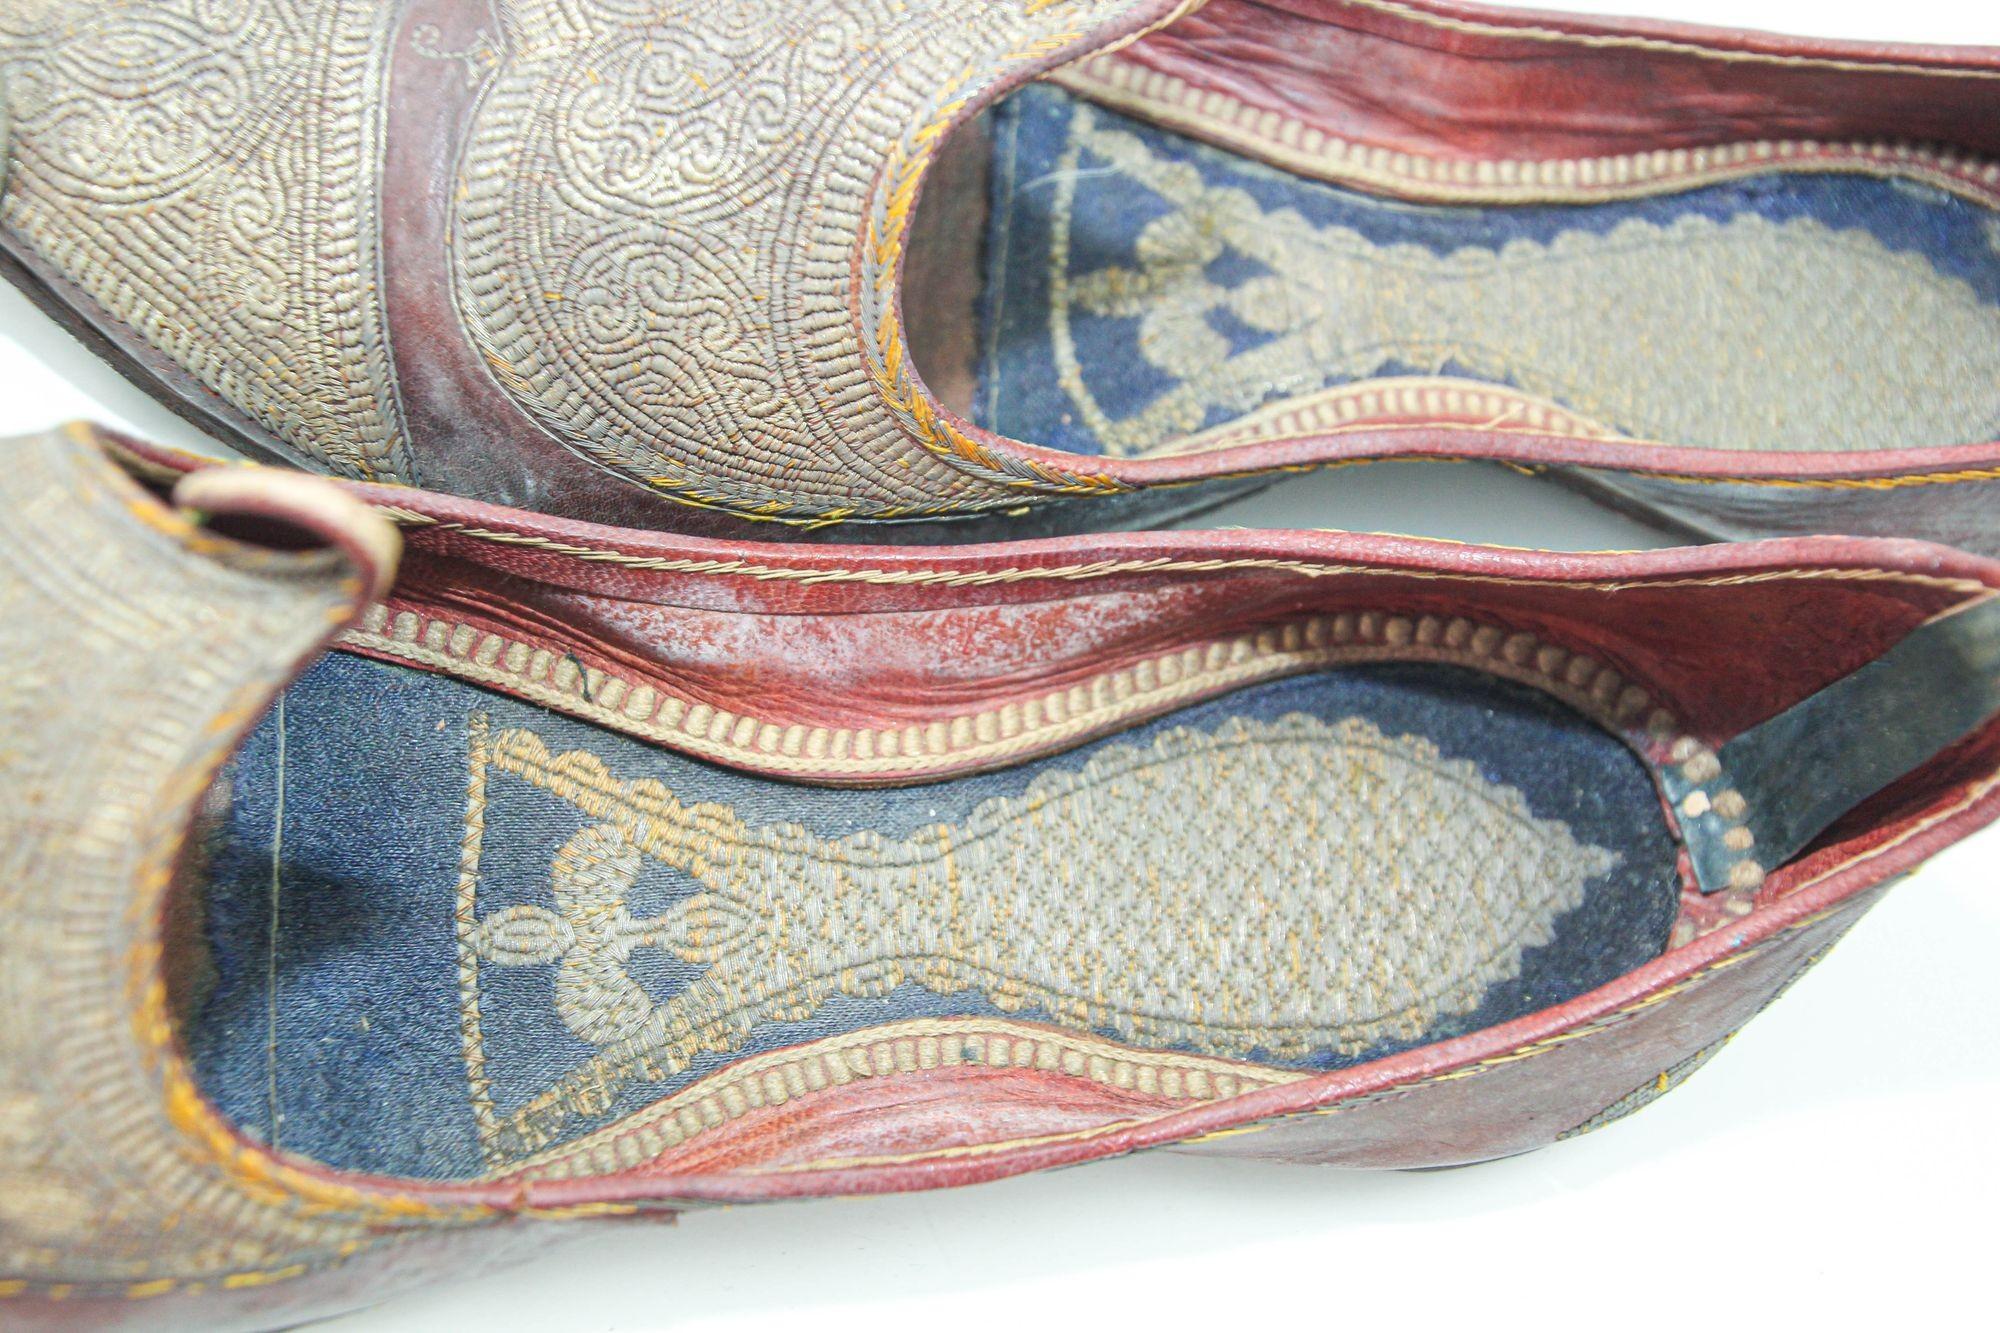 Antique Leather Mughal Raj Ottoman Moorish Shoes Gold Embroidered For Sale 1